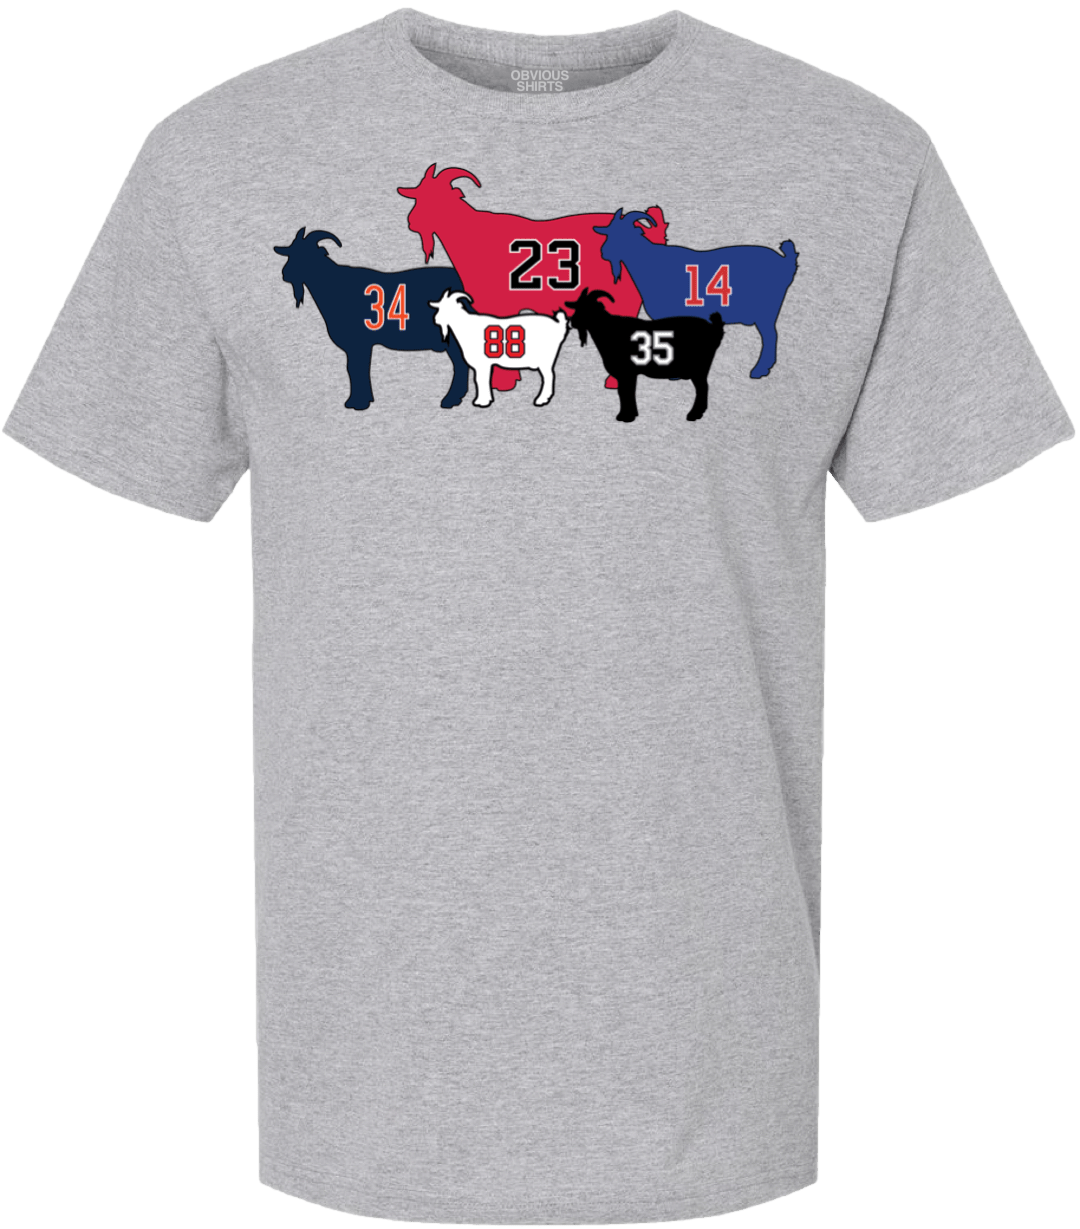 THE CHICAGOATS. (ALL SPORTS) - OBVIOUS SHIRTS